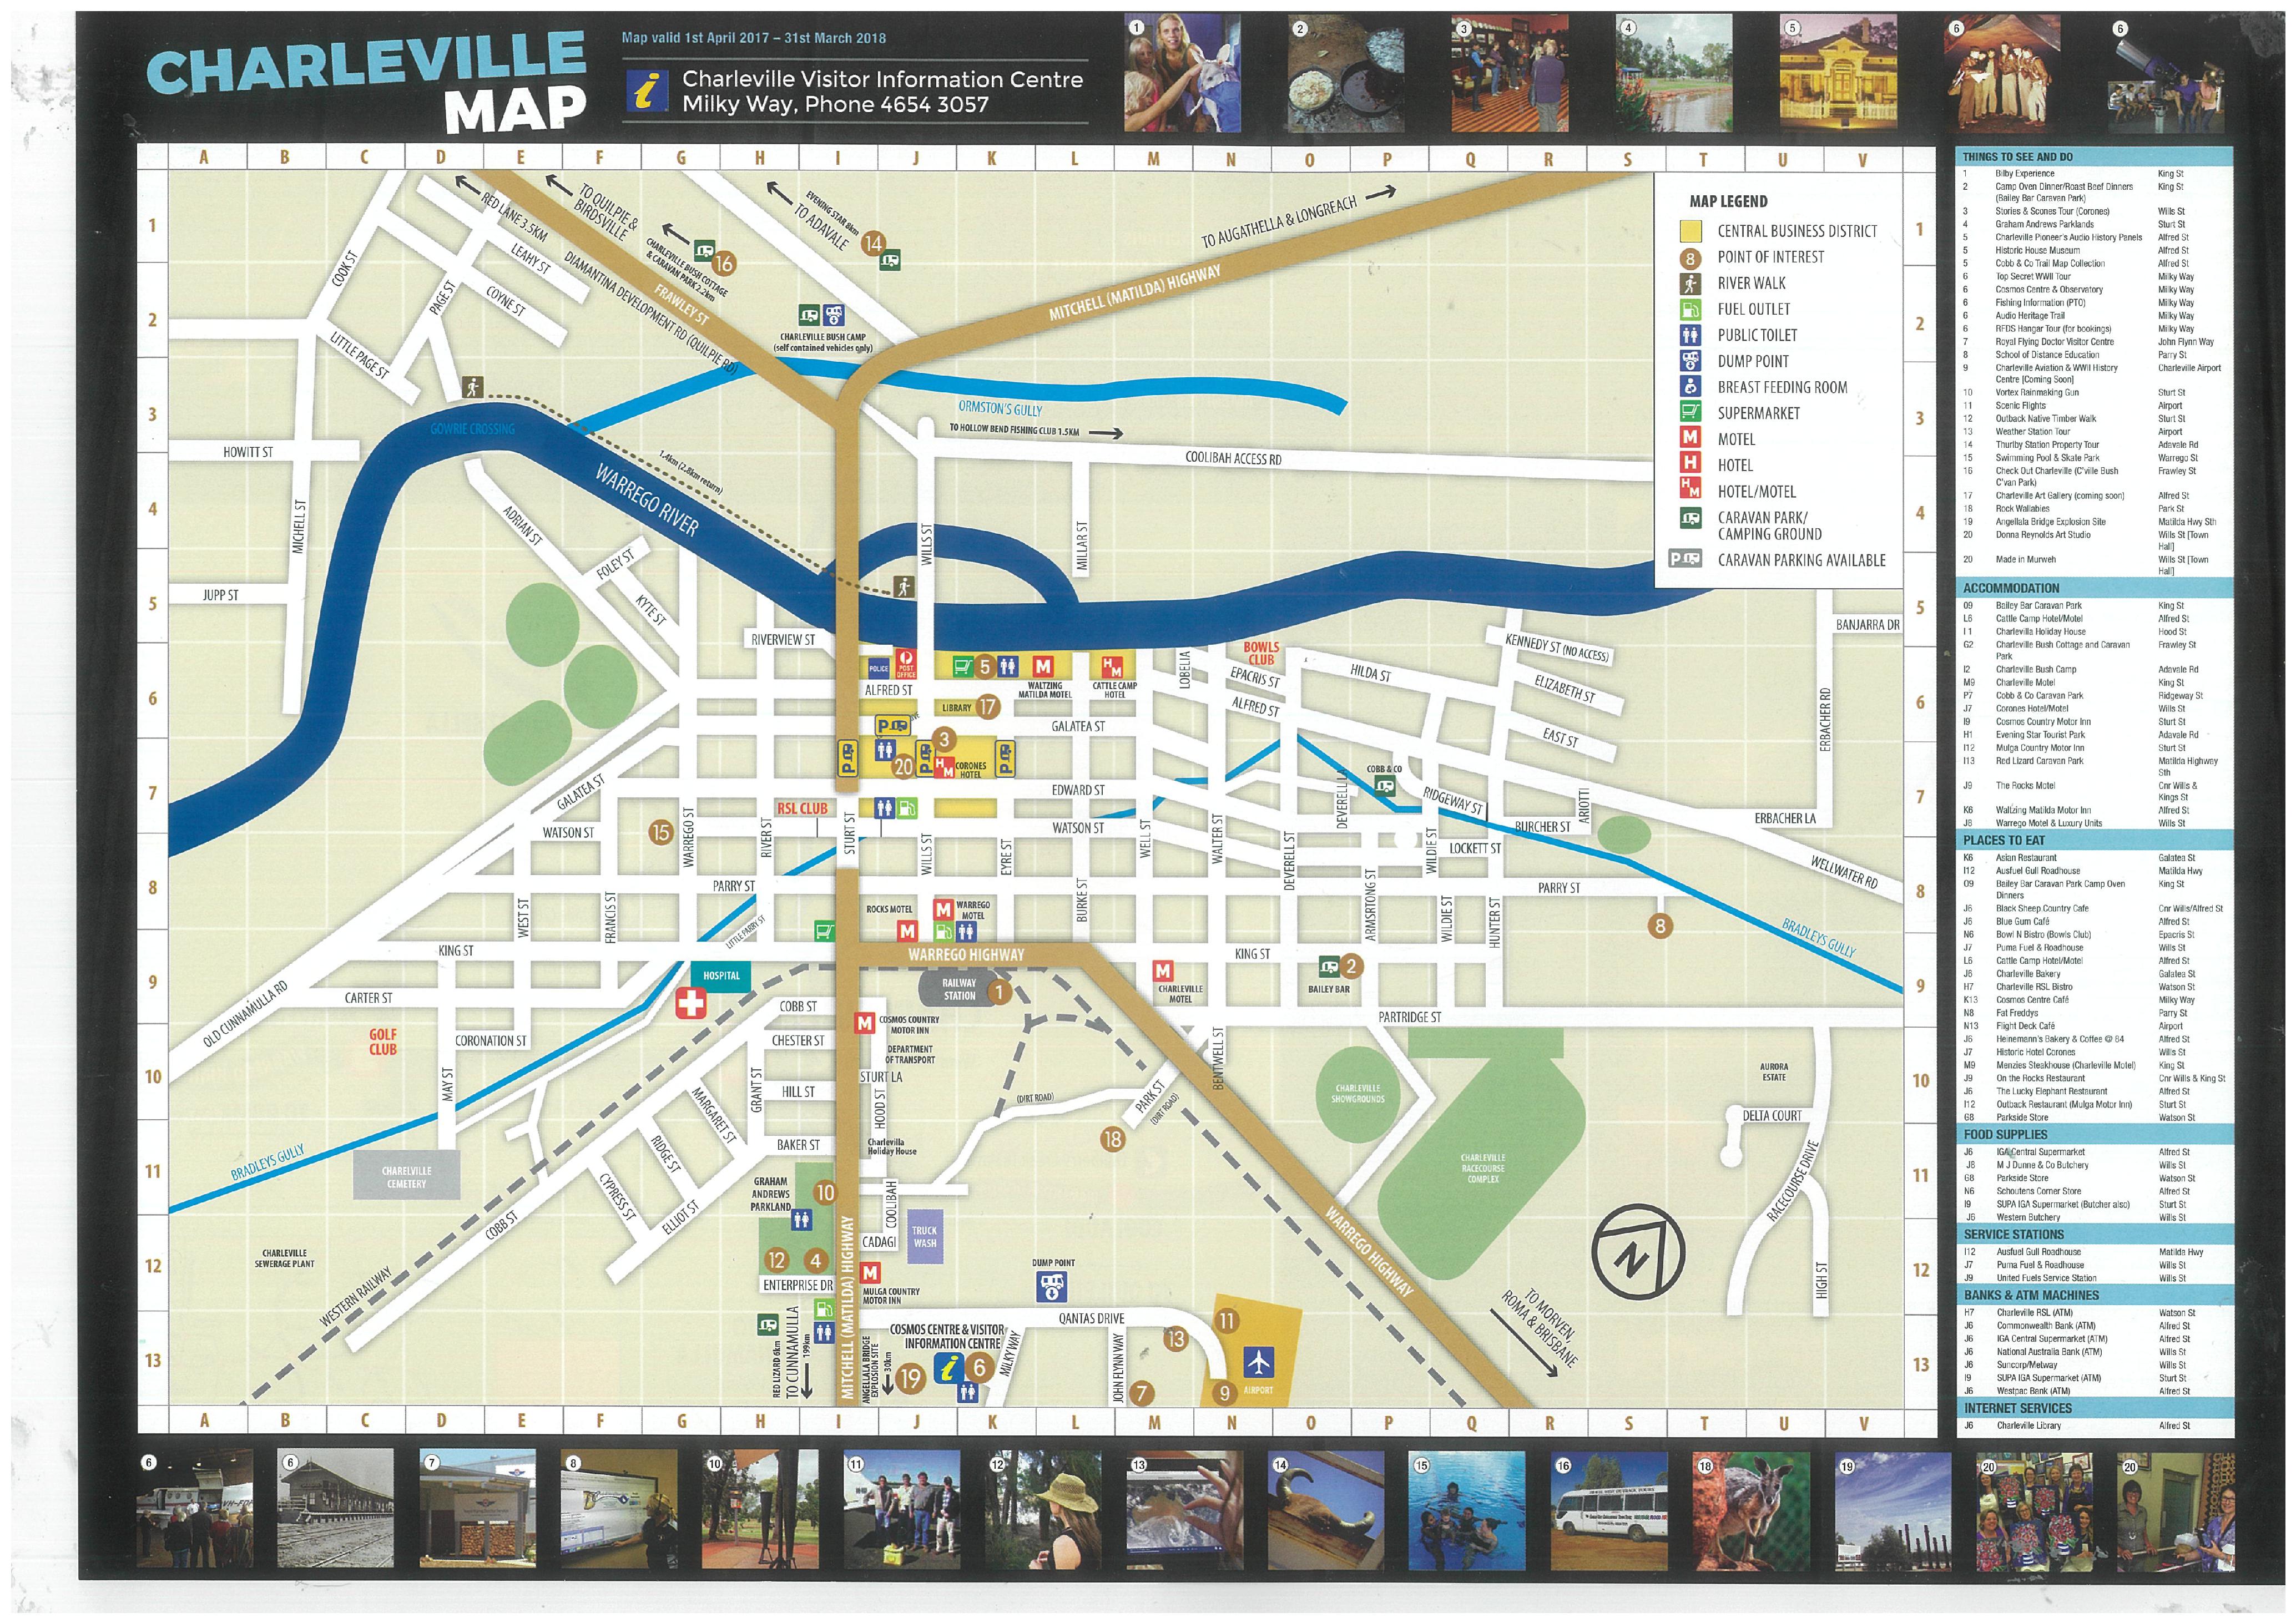 Charleville Town Map_Page_1.jpg